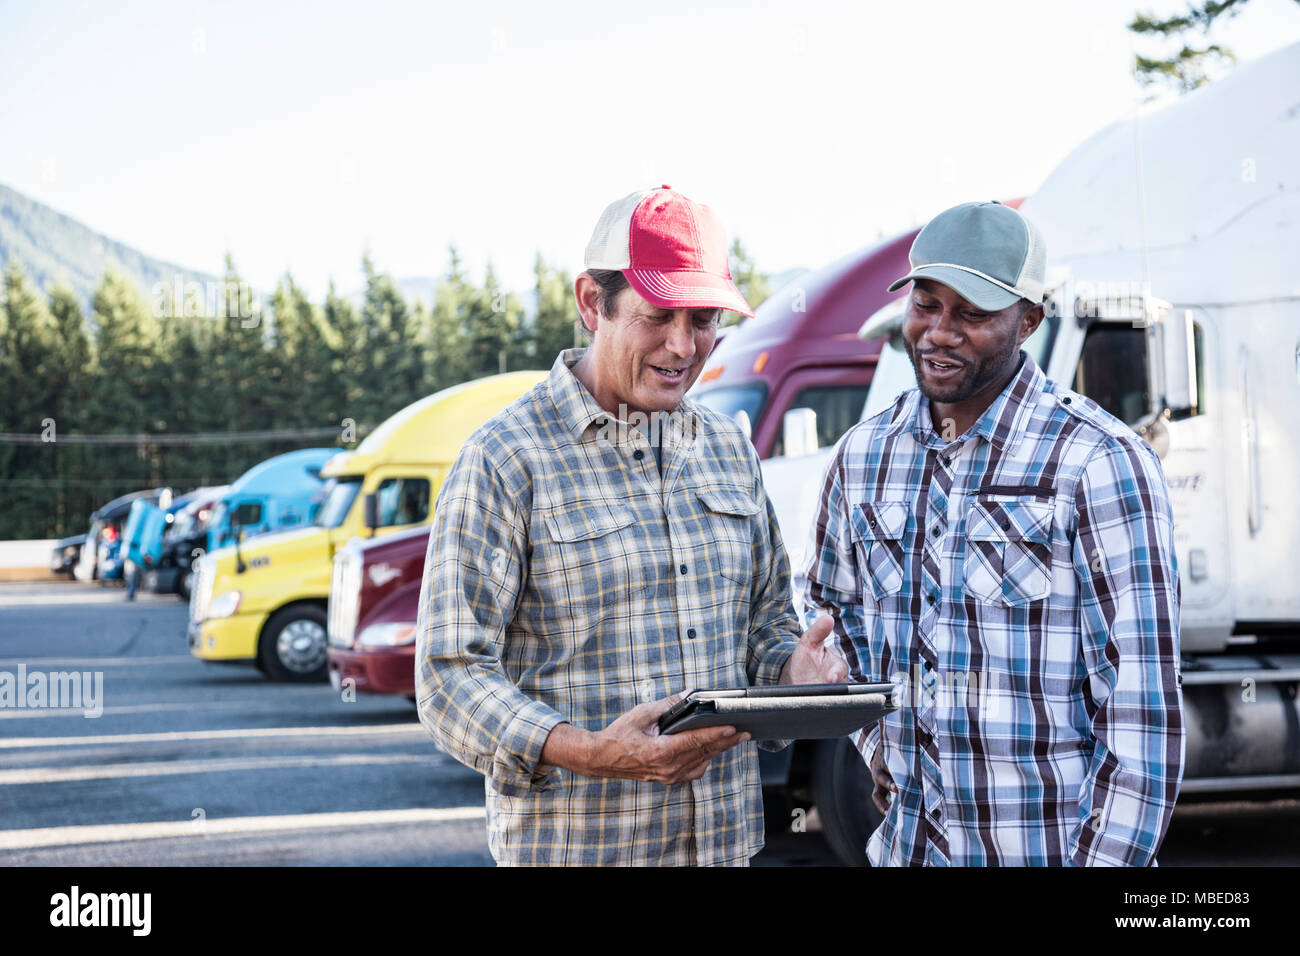 A caucasian man and a black man truck driving team together in a truck stop parking lot. Stock Photo